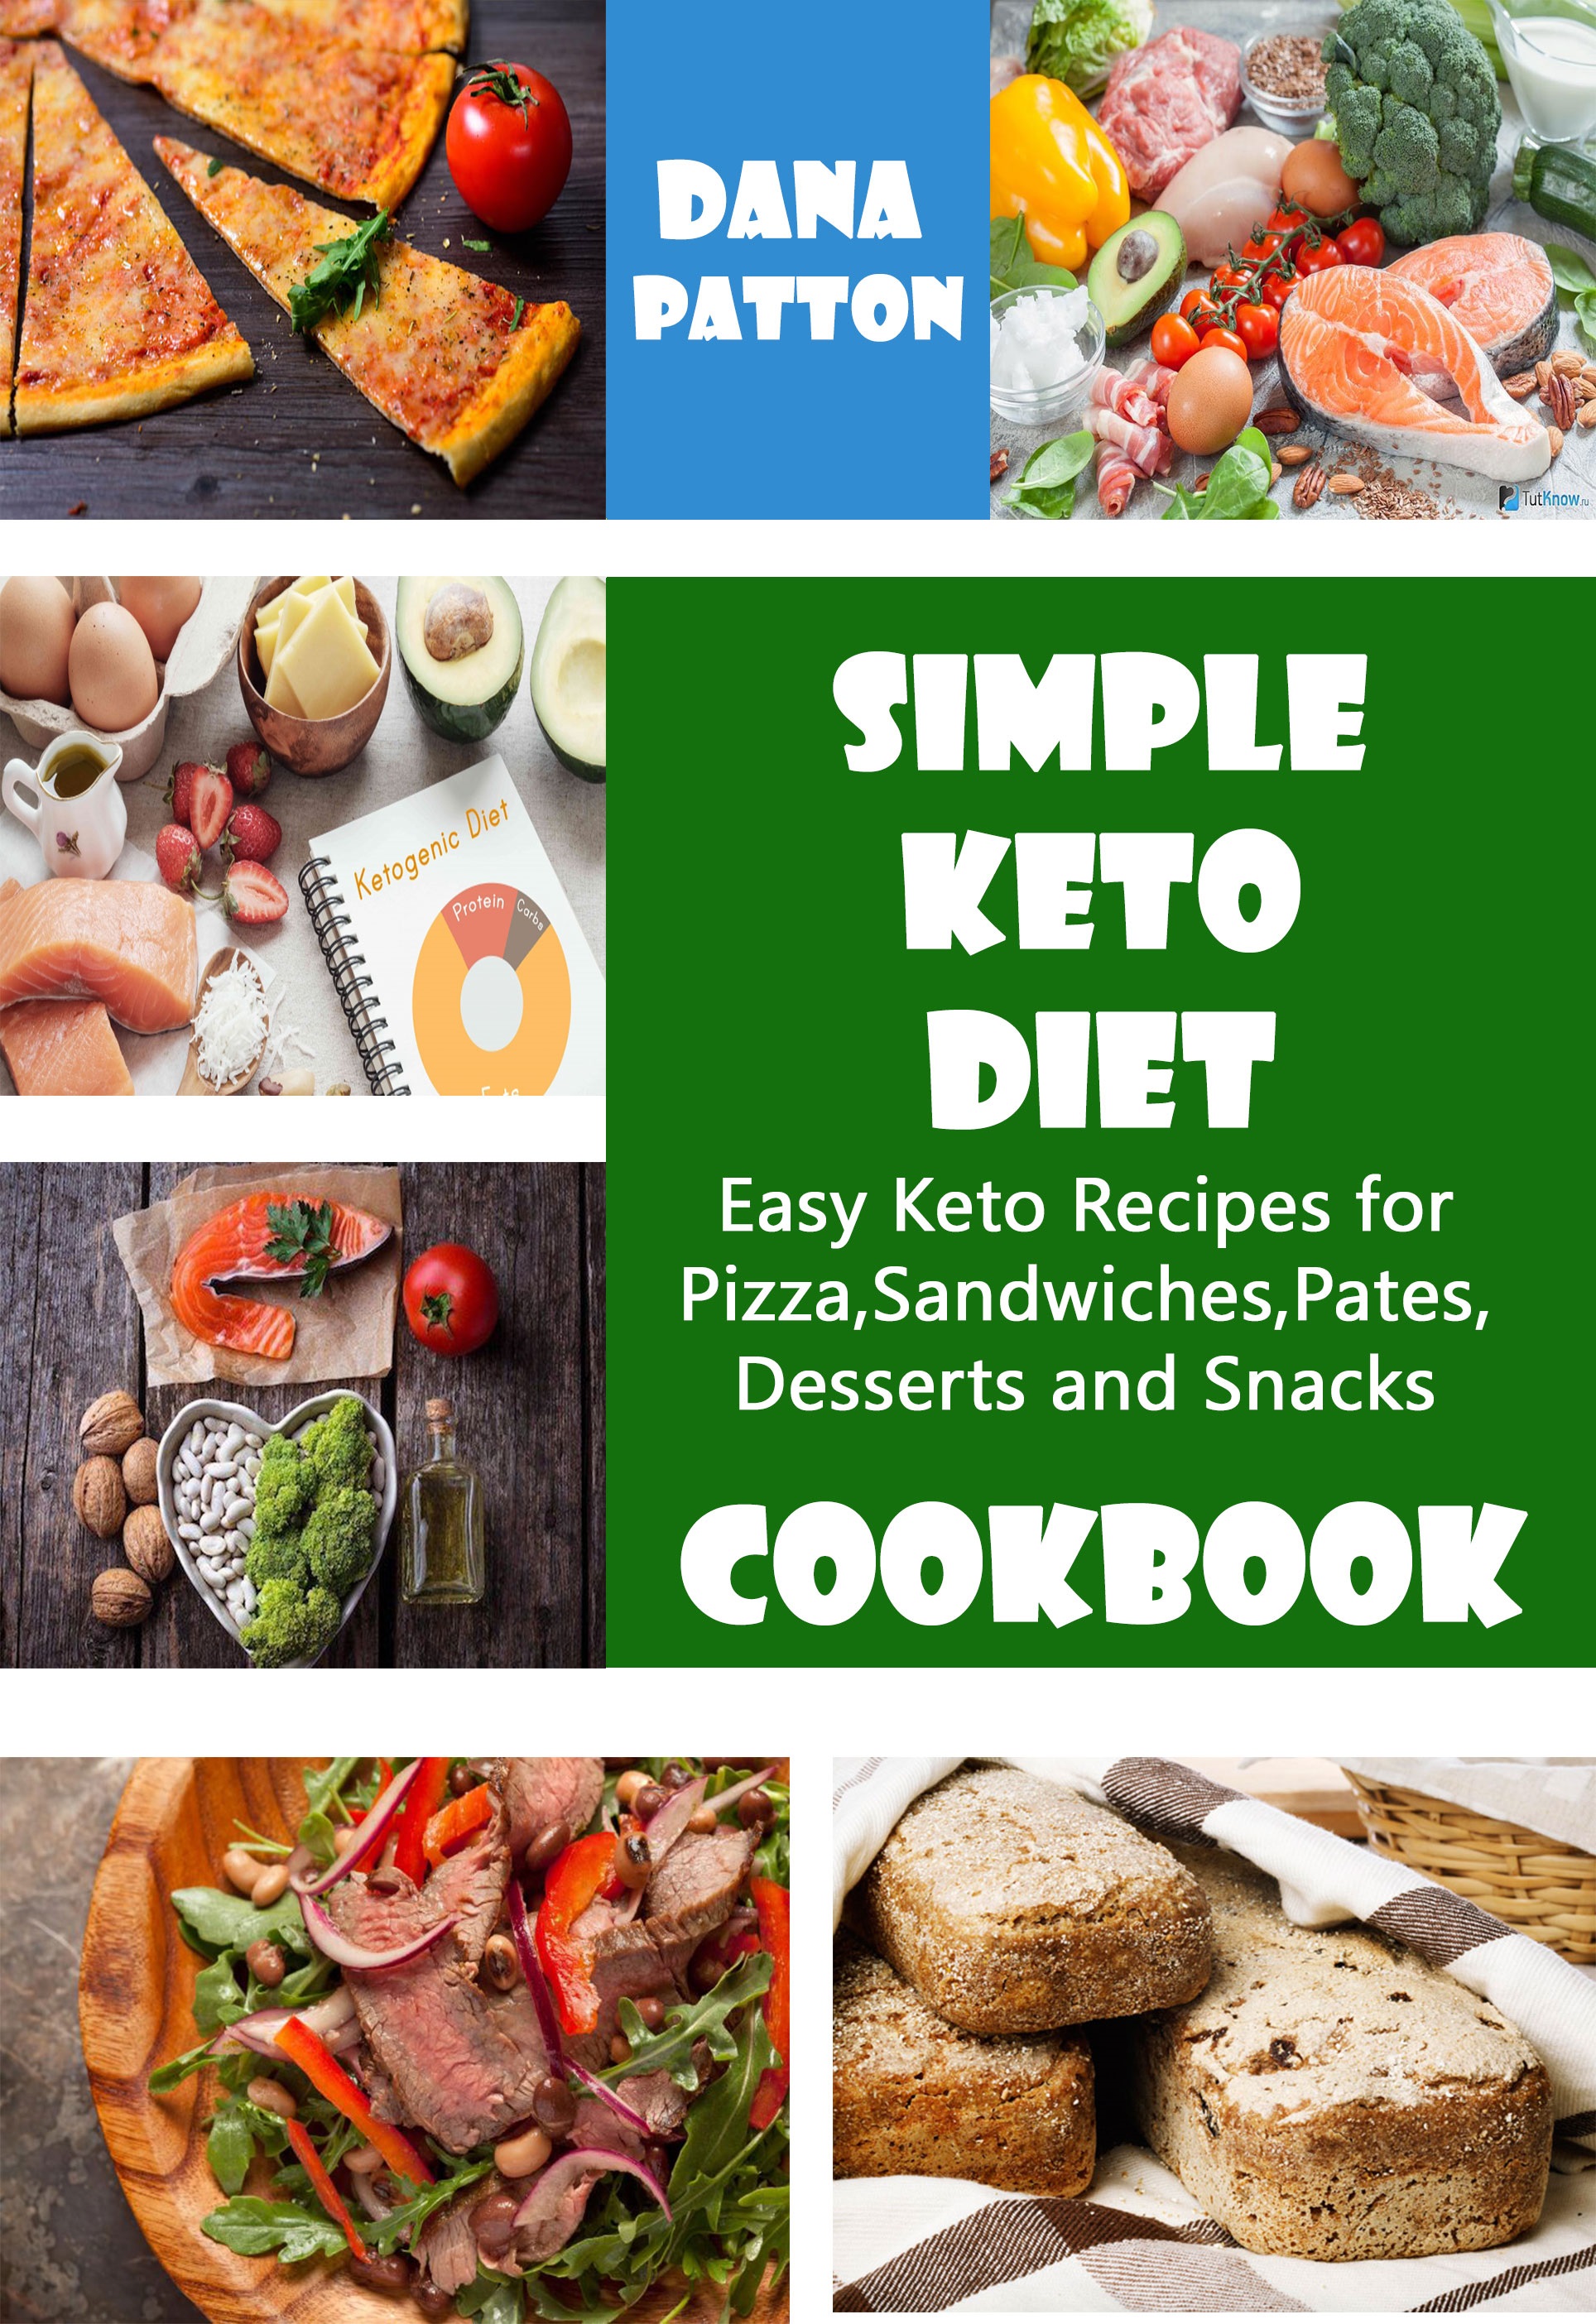 FREE: Simple Keto Diet Cookbook: Easy Keto Recipes for Pizza, Sandwiches, Pates, Desserts and Snacks. by Dana Patton